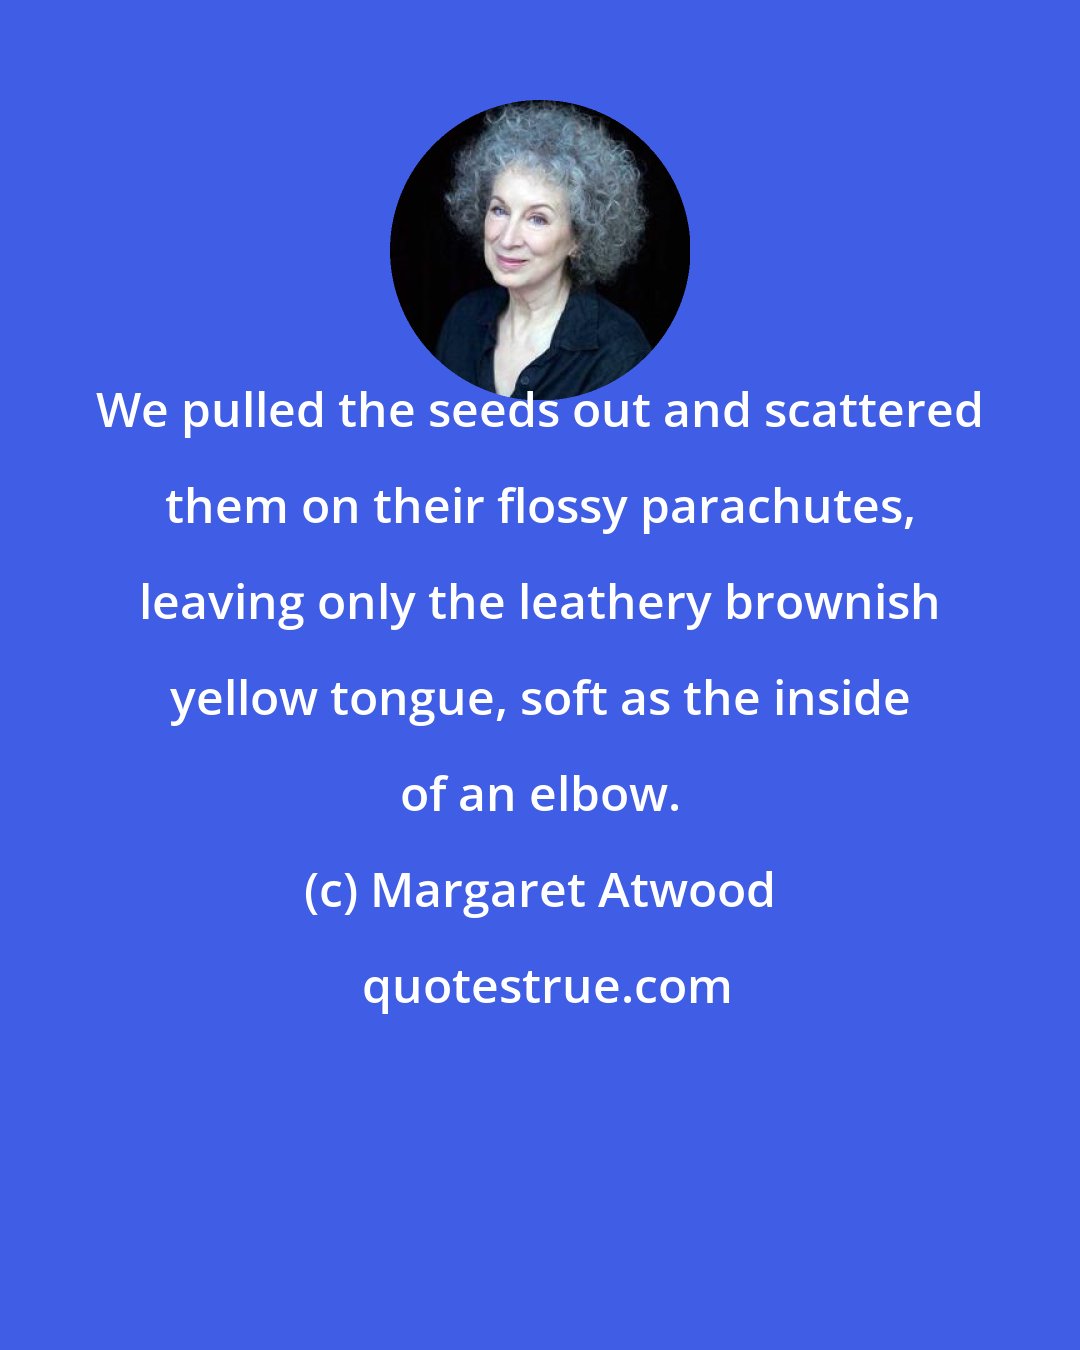 Margaret Atwood: We pulled the seeds out and scattered them on their flossy parachutes, leaving only the leathery brownish yellow tongue, soft as the inside of an elbow.